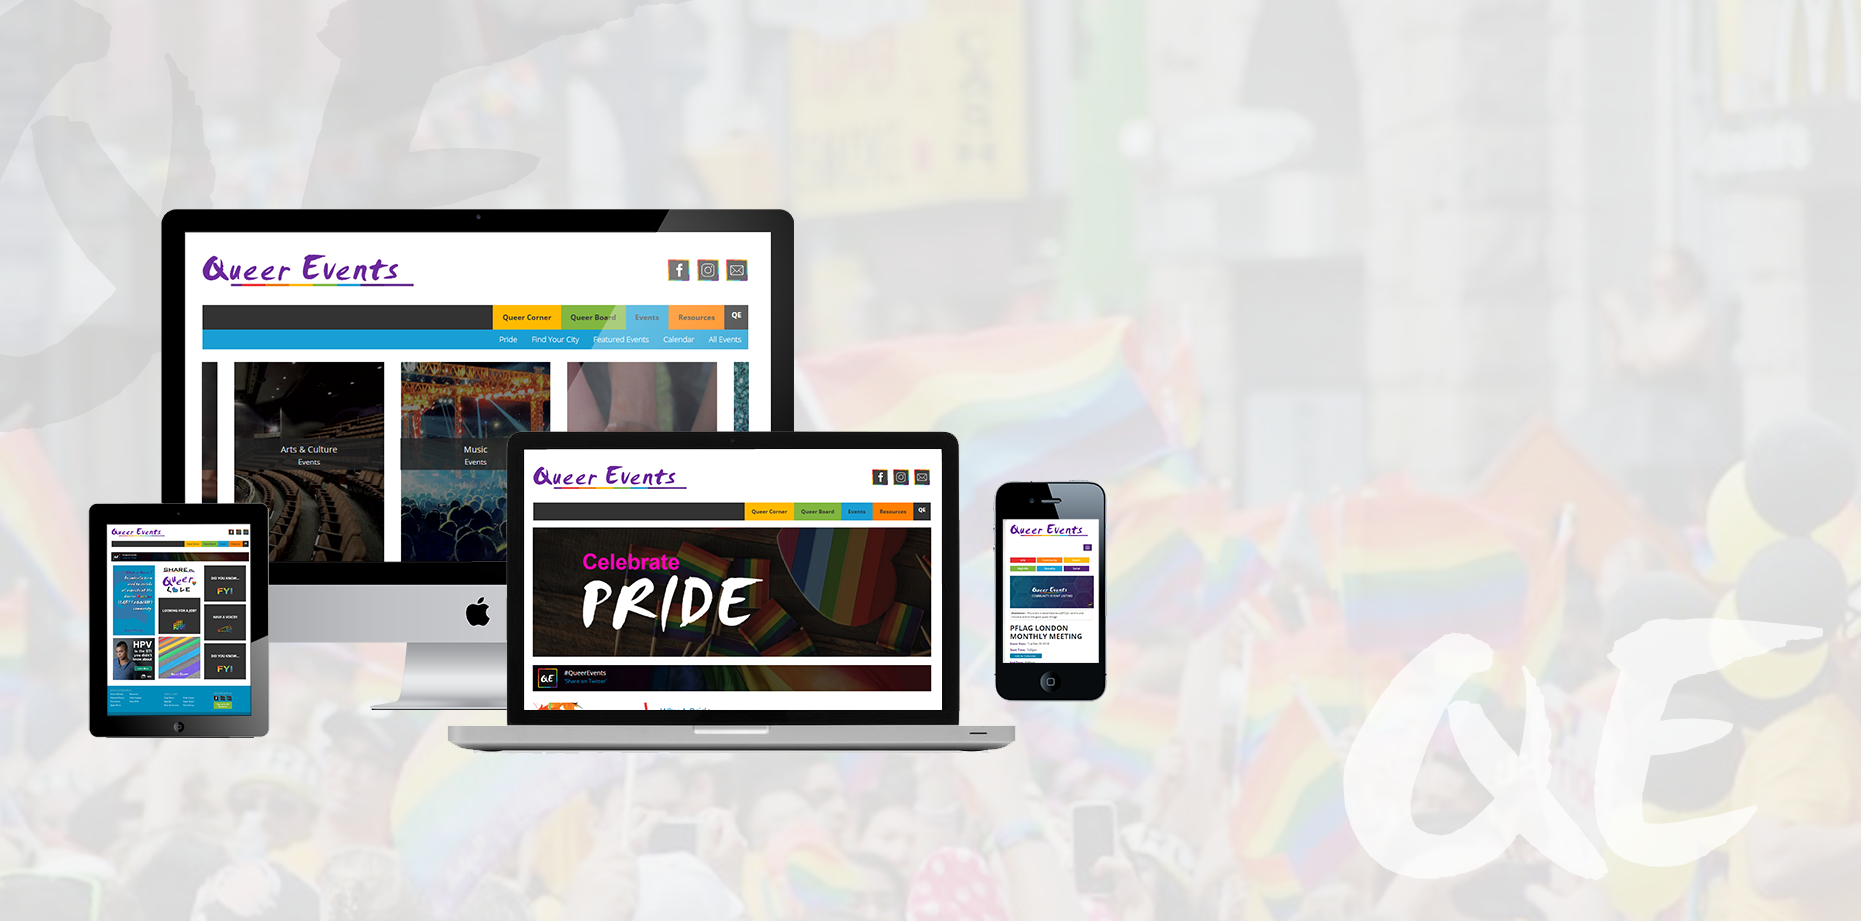 queerevents.ca online resources for lgbt community